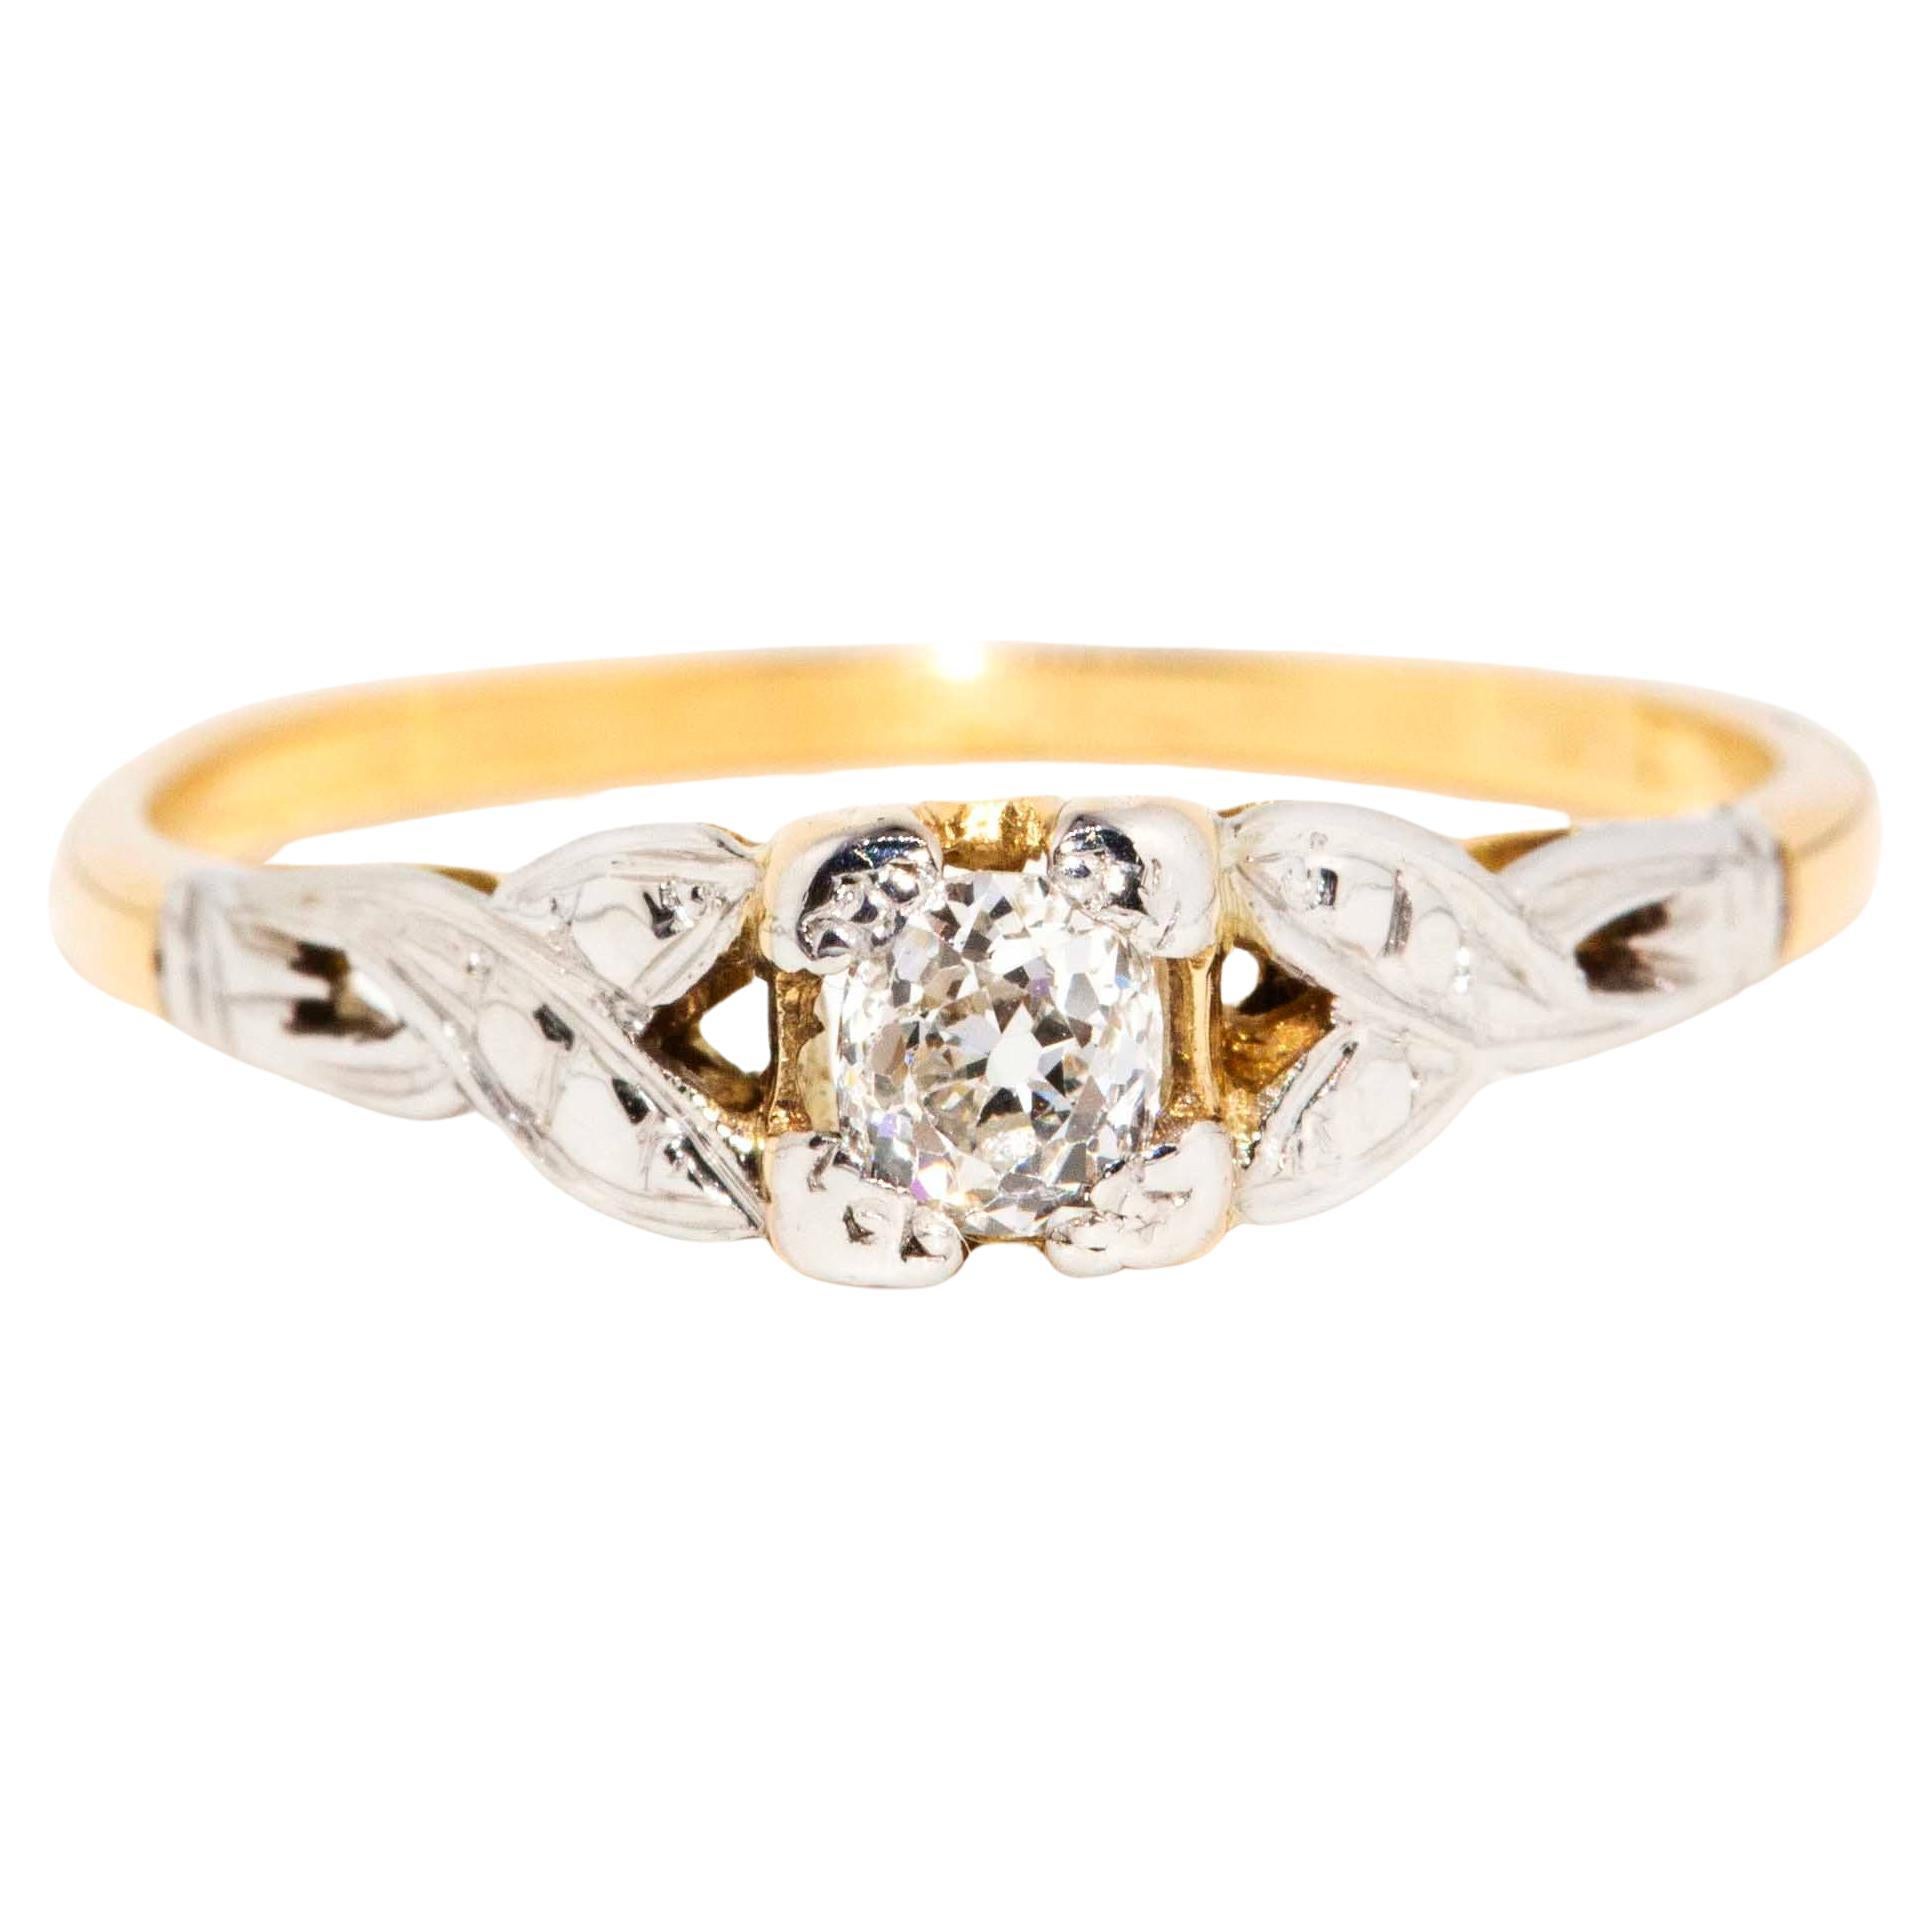 Vintage Circa 1930s Old Cut Diamond Solitaire Ring 15 Carat Yellow & White Gold